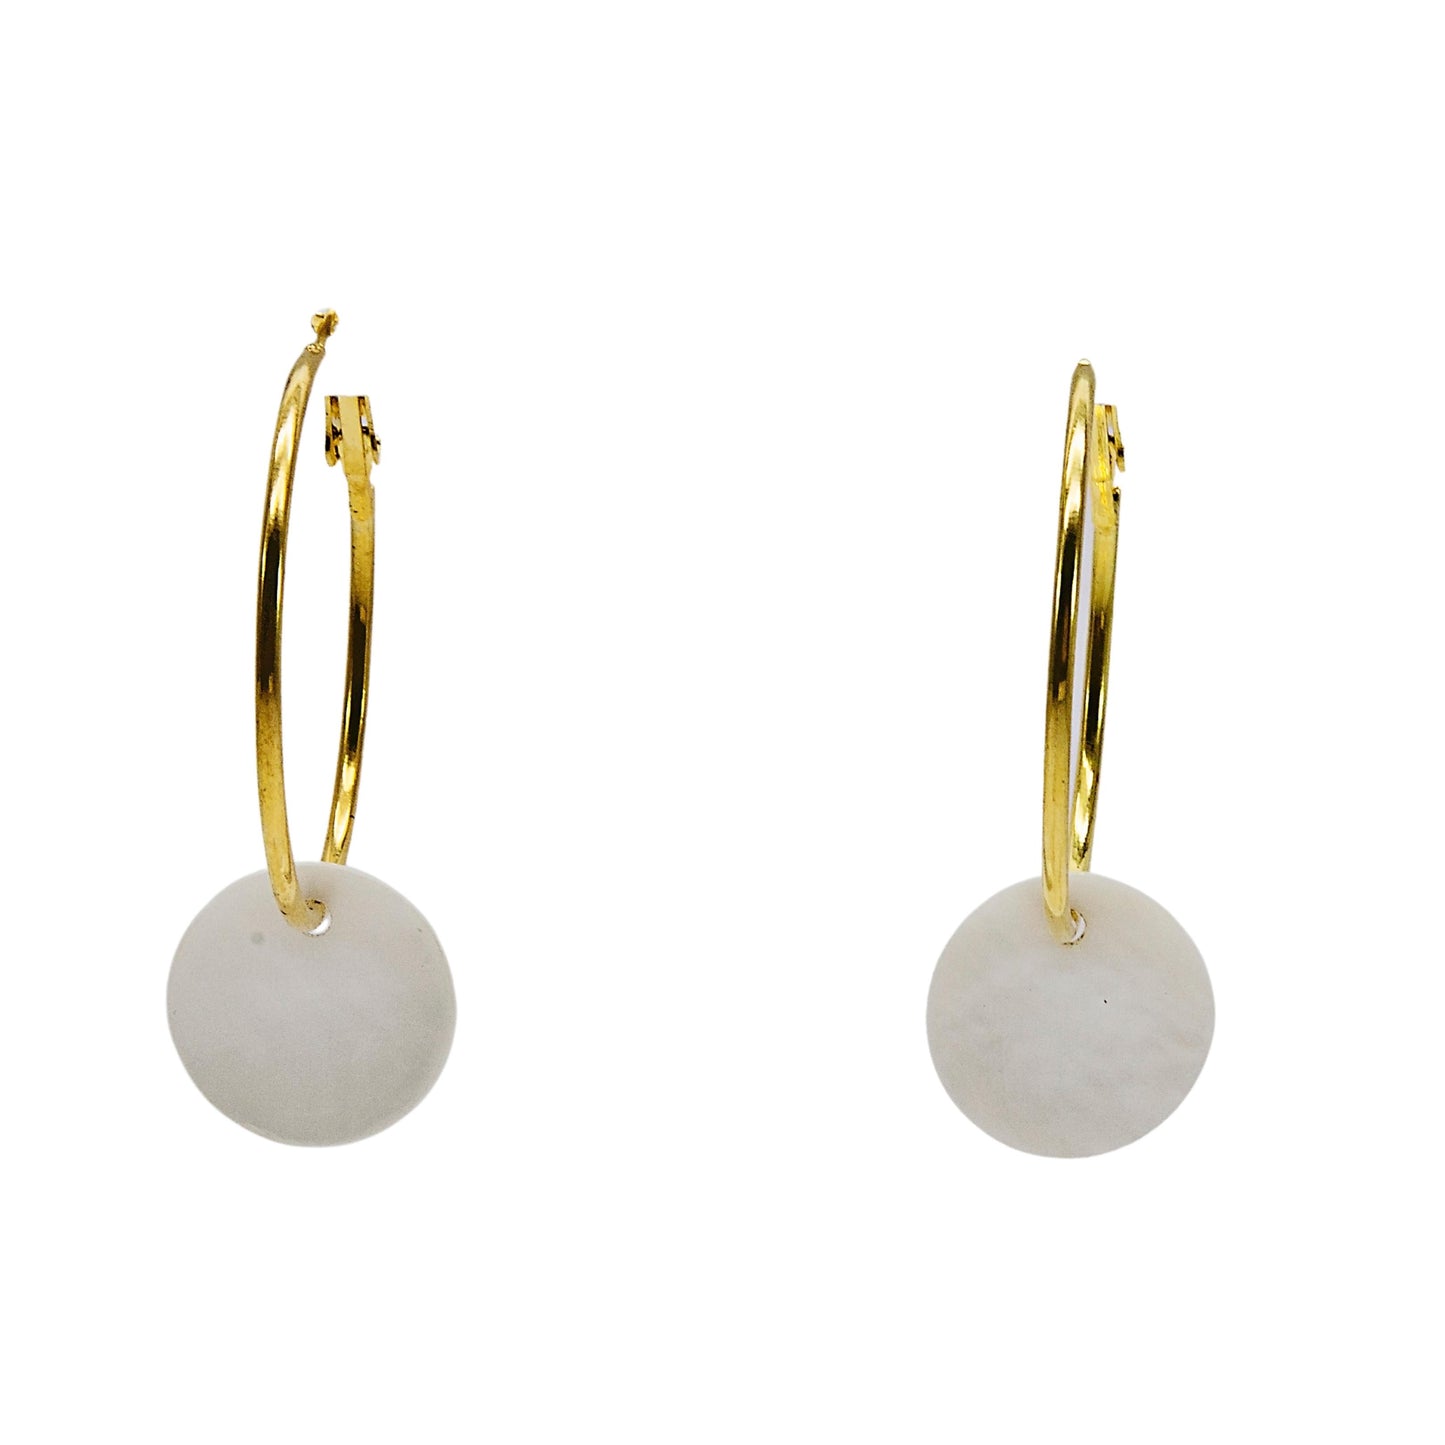 Gold Hoop Earrings with Mother of Pearl Shell Discs